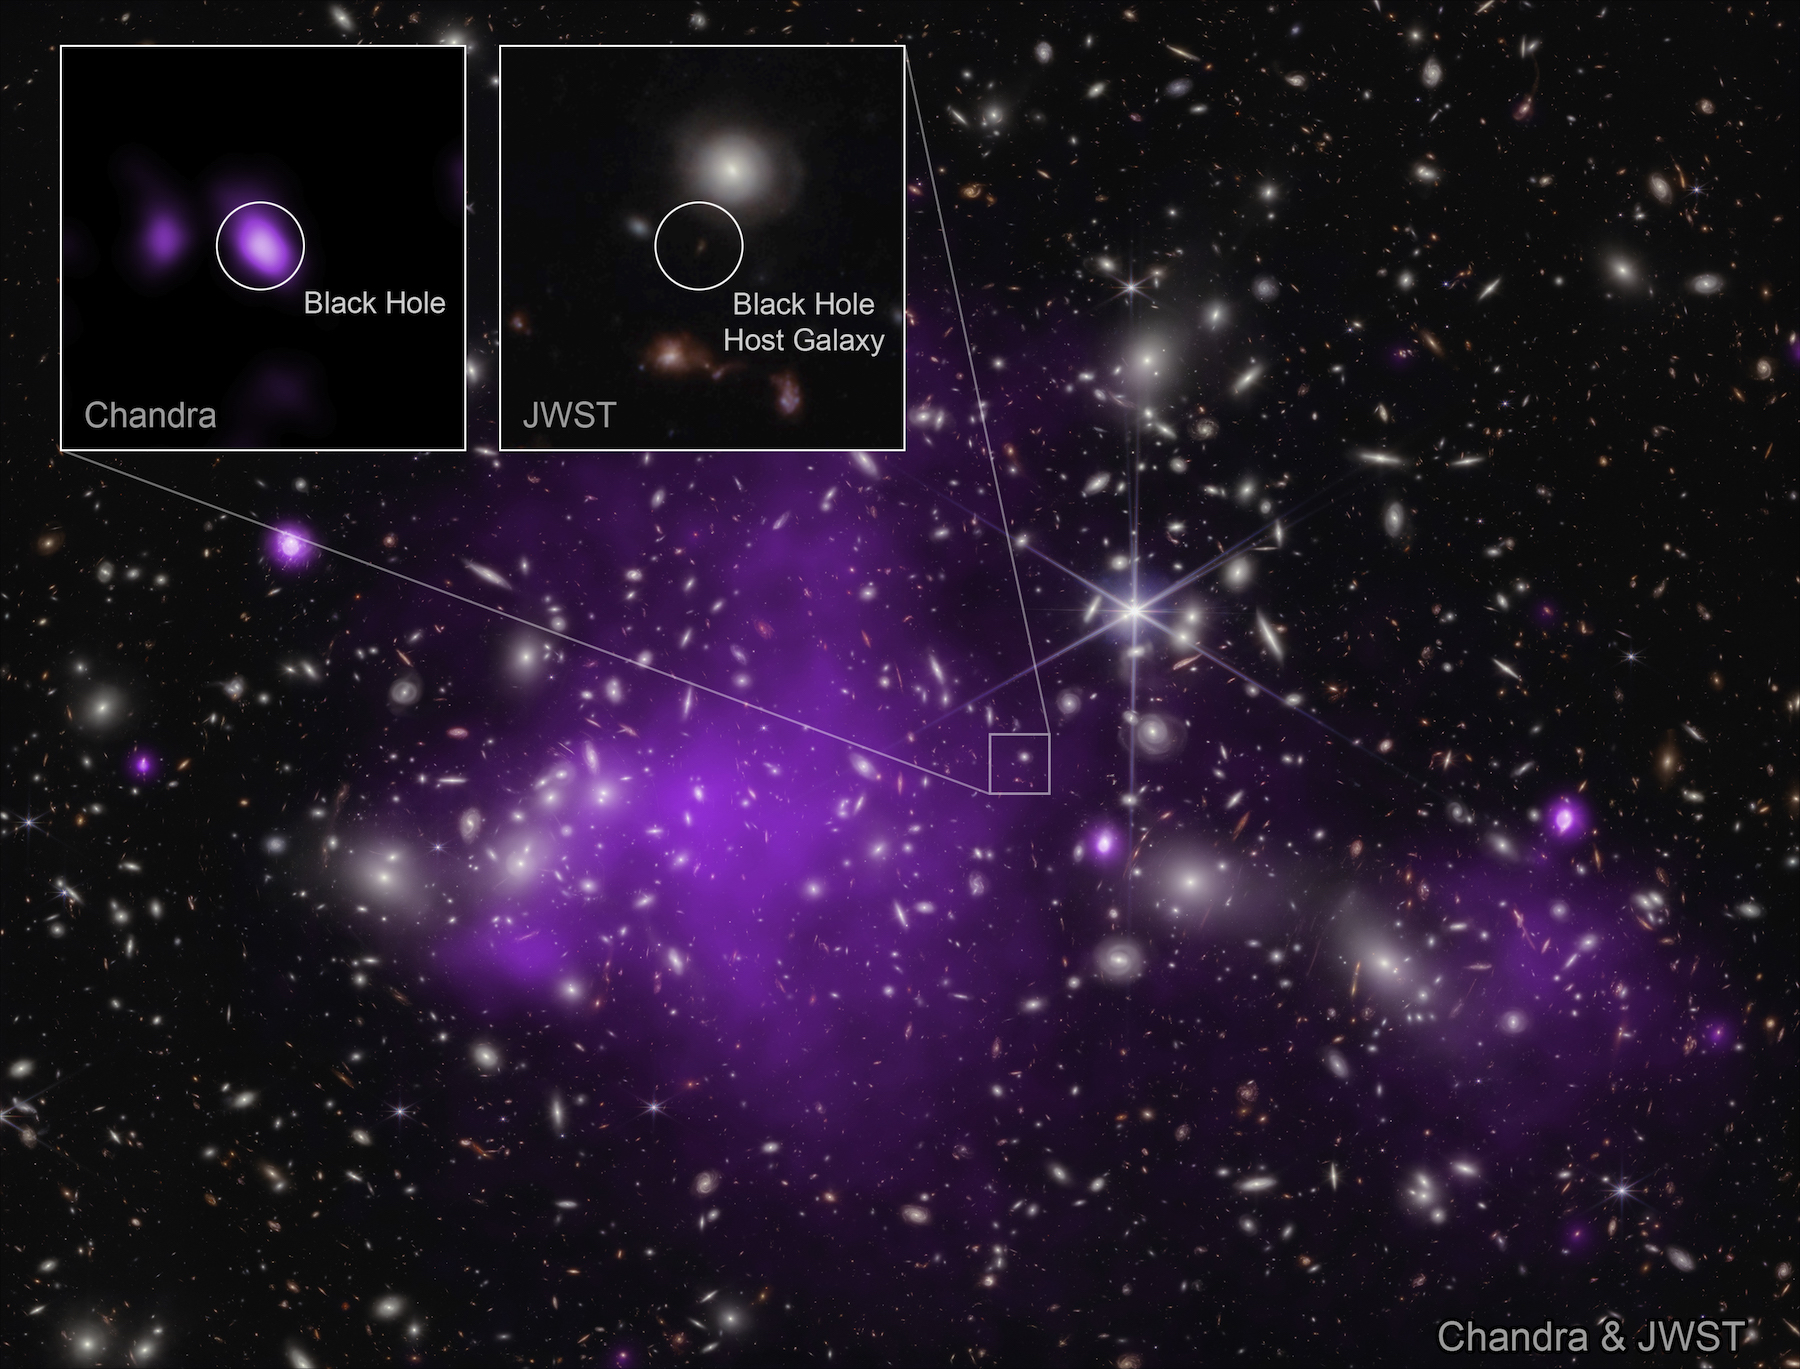 Against a black background, a hazy purple cloud with clusters of galaxies that look like fuzzy white dots. A black hole in the center is highlighted in an inset.